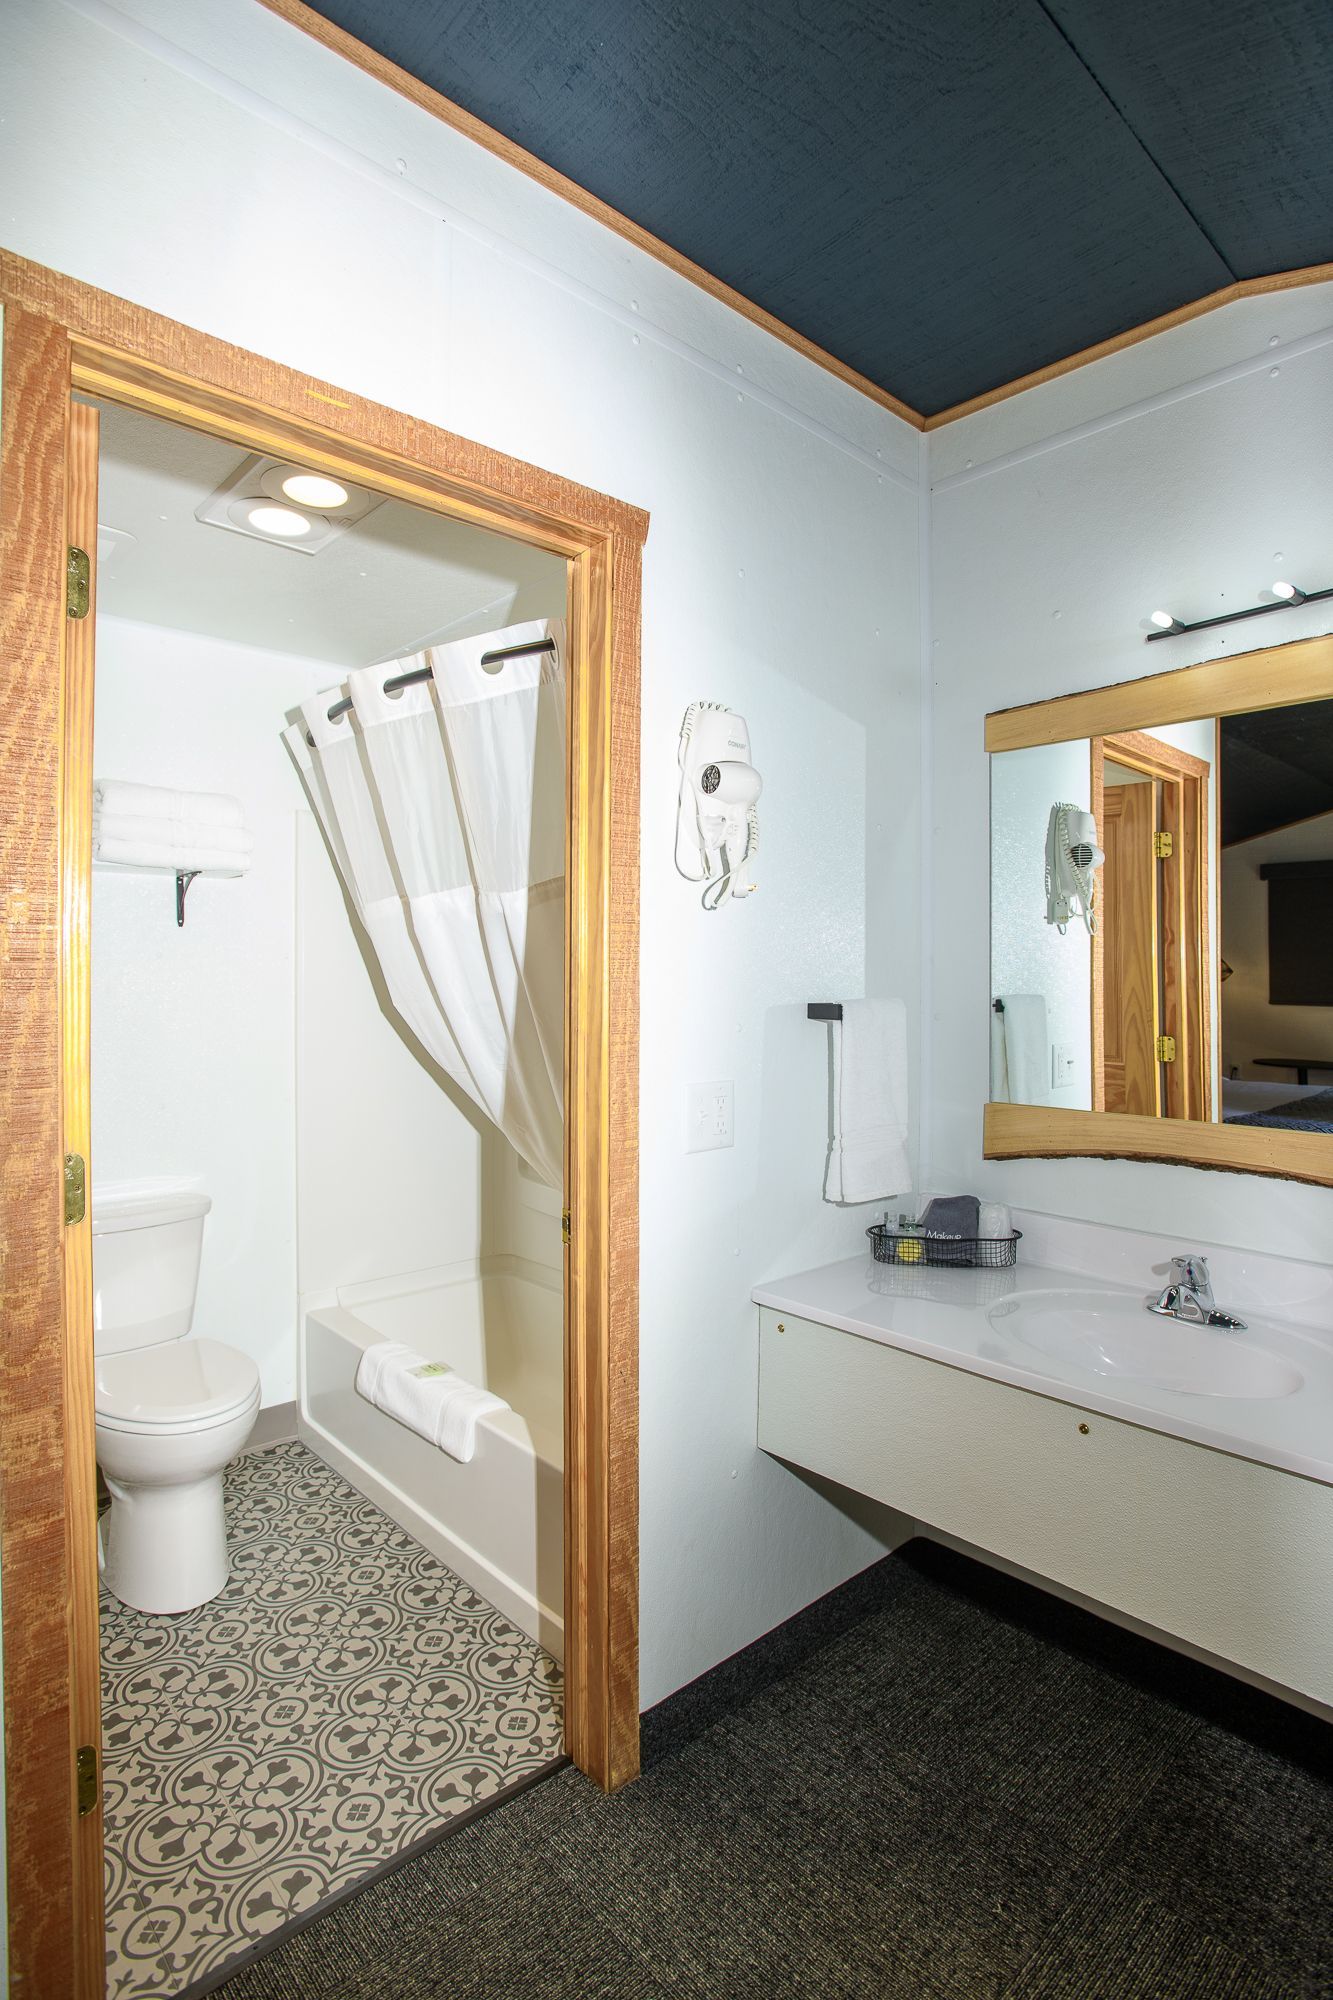 A bathroom with a toilet , sink , and mirror.